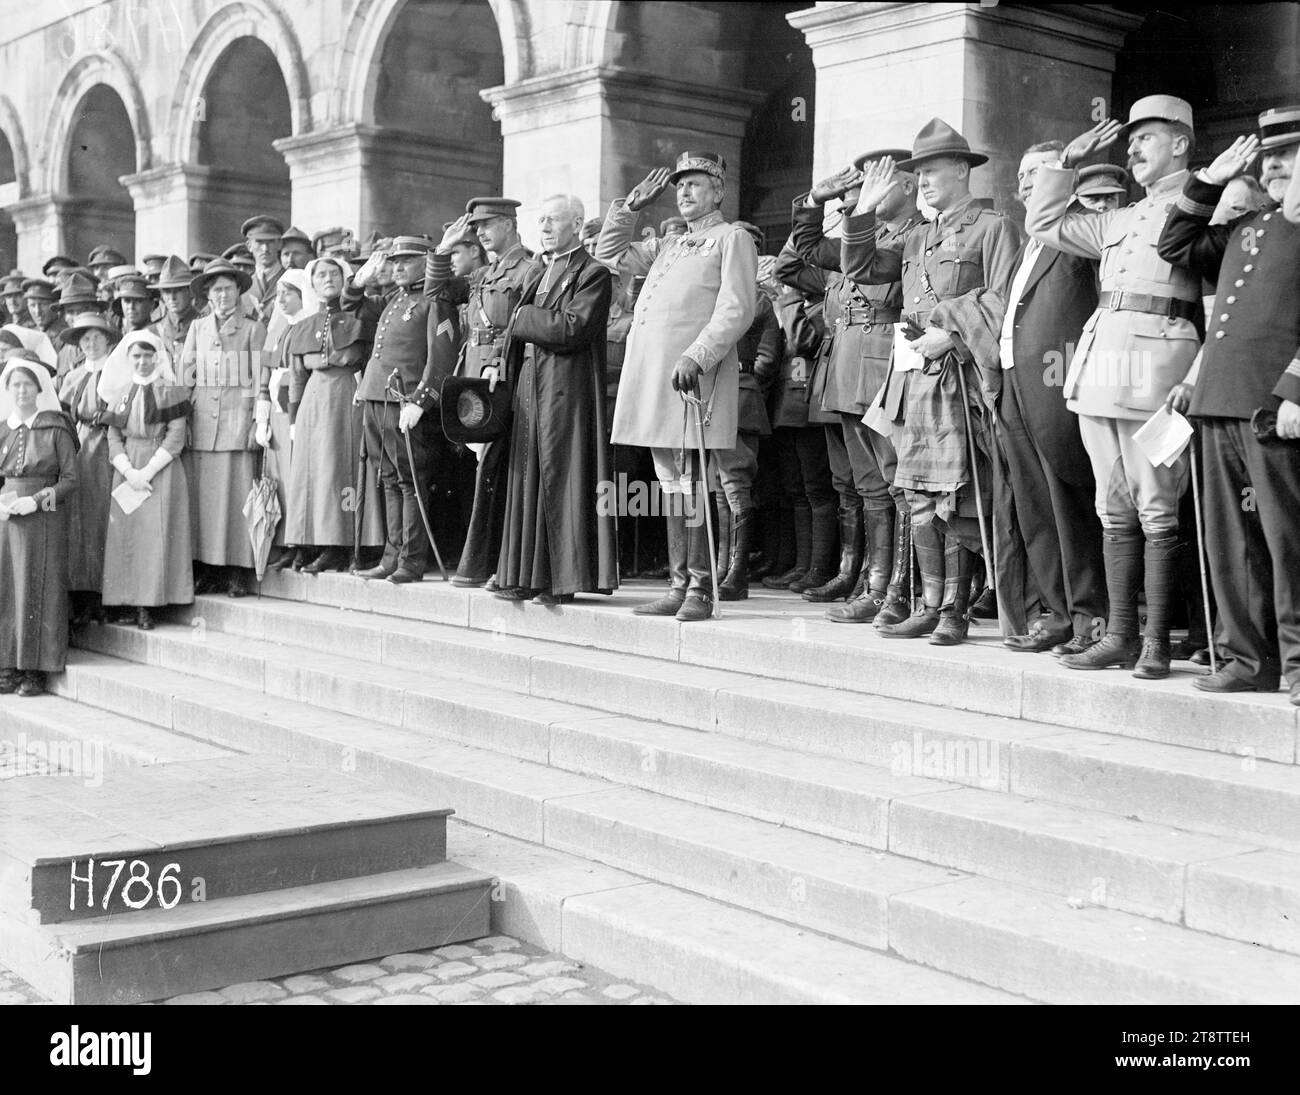 French, British and New Zealand officers taking the salute, Hazebrouck, French, British and New Zealand officers take the salute at the Fete National celebrations in Hazebrouck during World War I. To the left stand nurses from the New Zealand Stationary Hospital, including its matron Fanny Price (on right next to saluting officer). Photograph taken 14 July 1917 Stock Photo